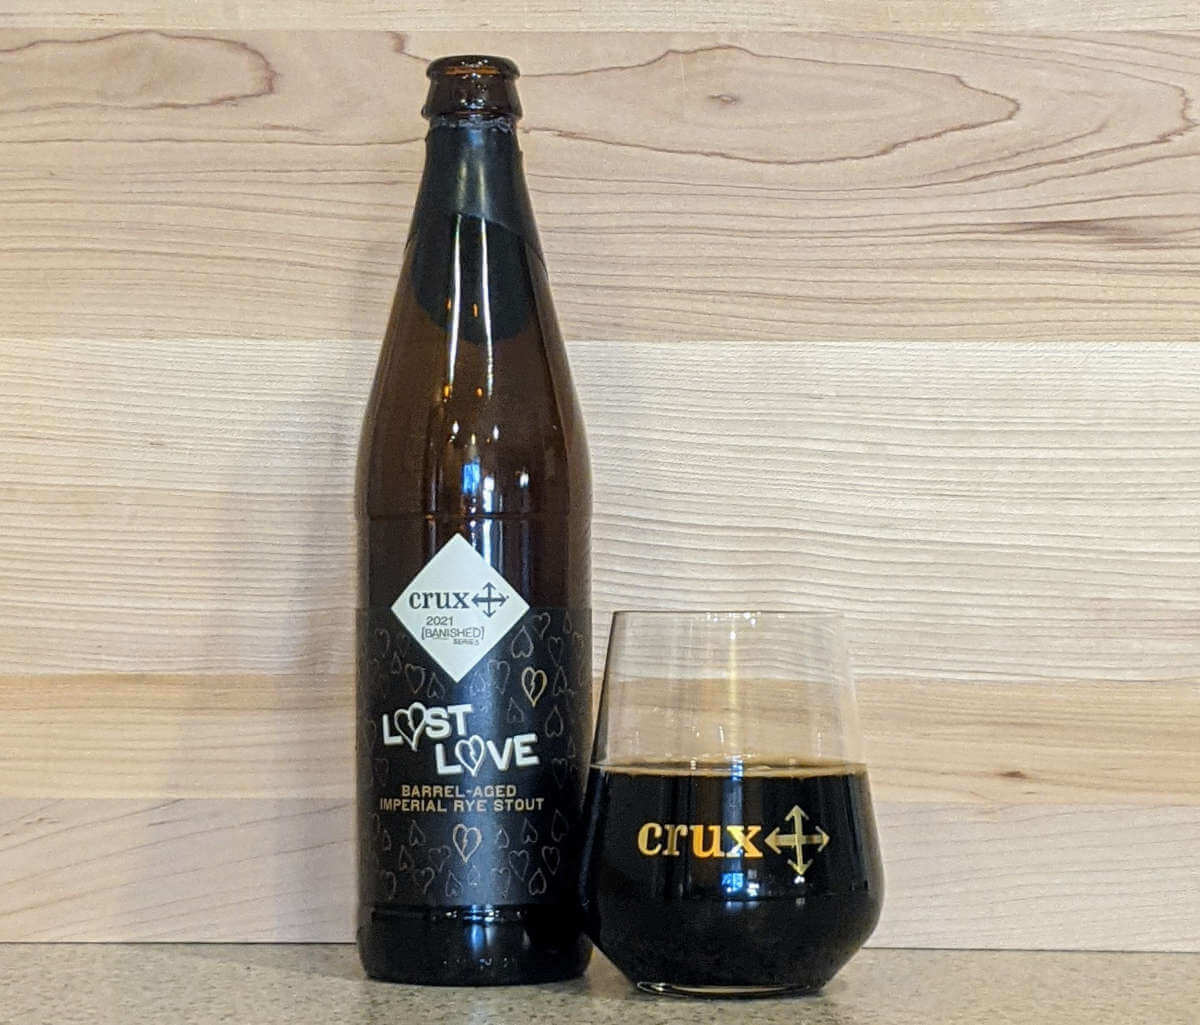 Latest print article: Crux brings the rye with Lost Love